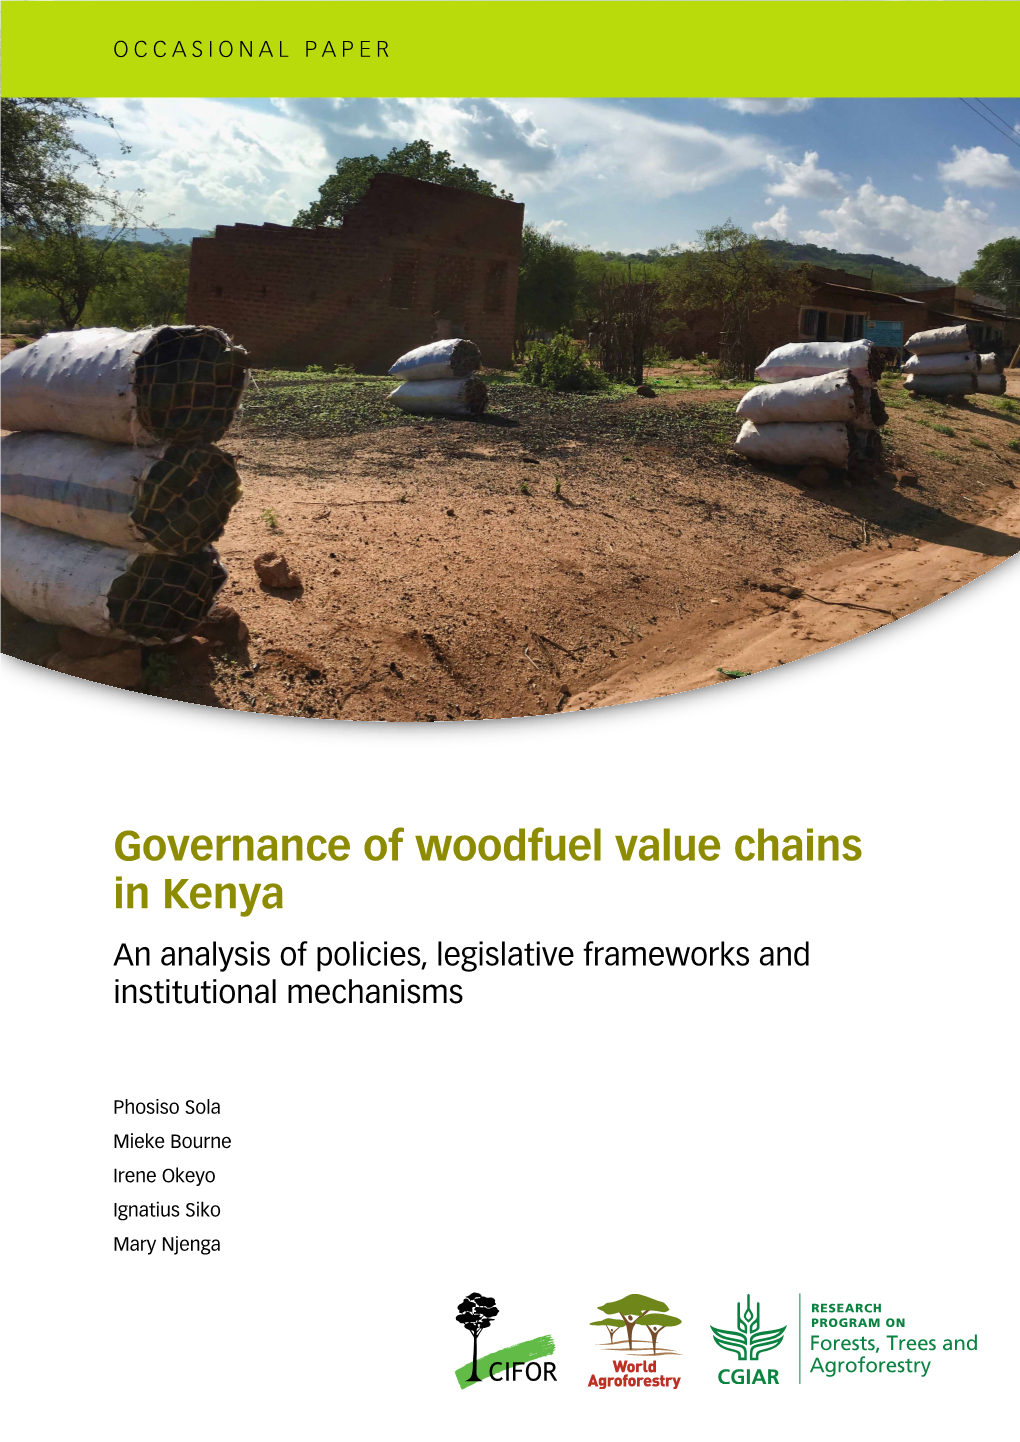 Governance of Woodfuel Value Chains in Kenya an Analysis of Policies, Legislative Frameworks and Institutional Mechanisms